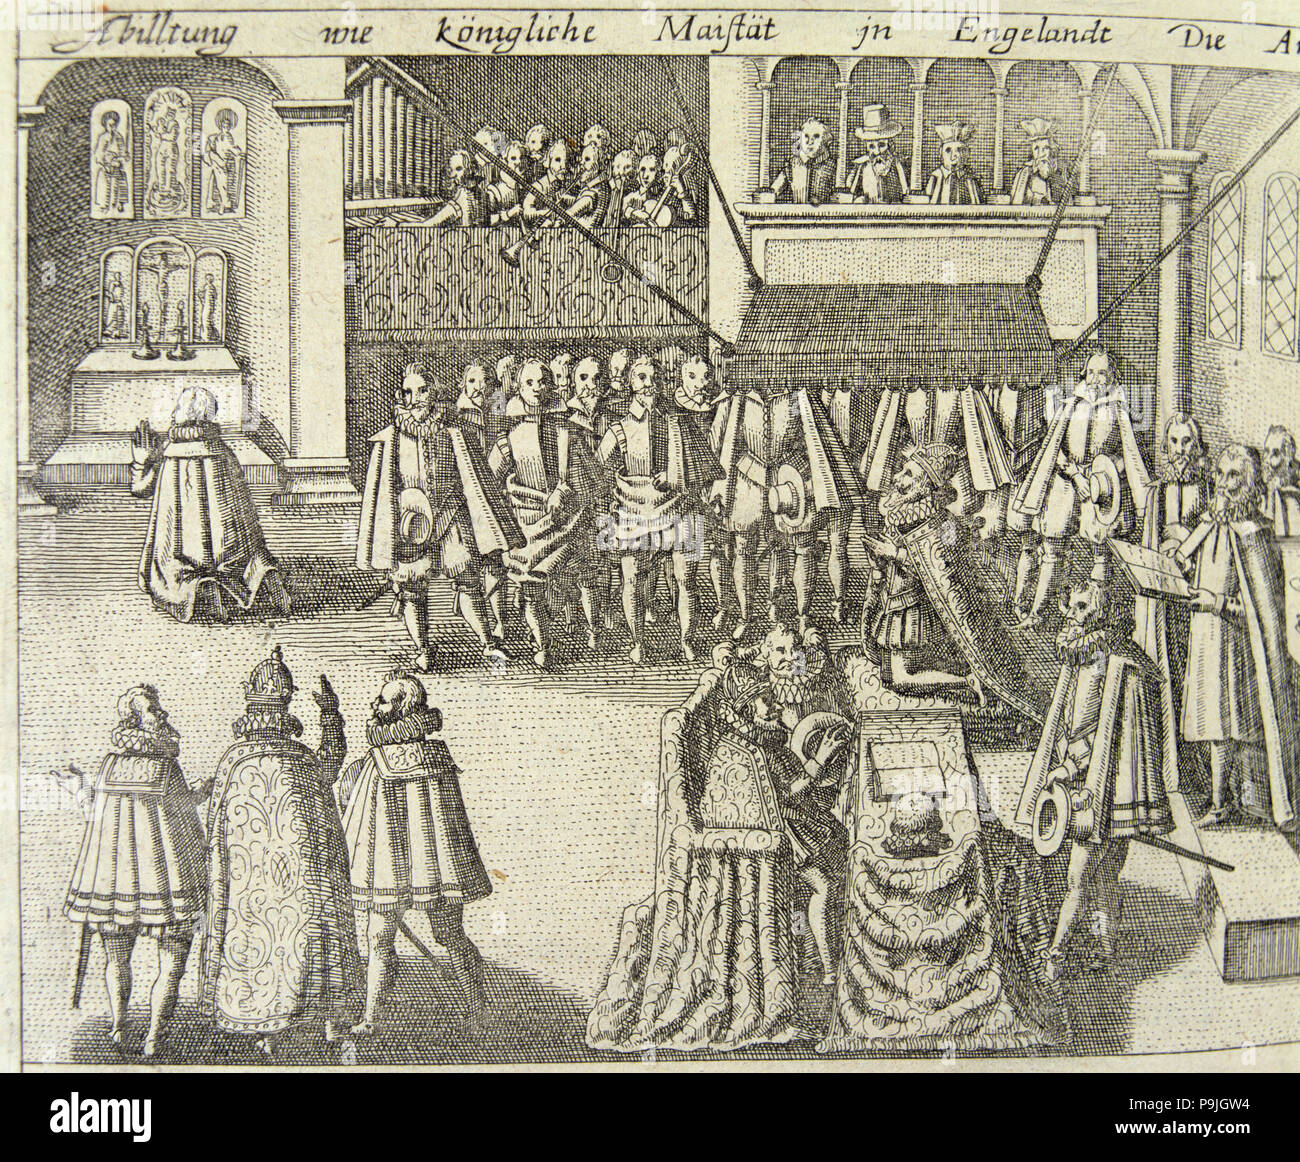 A session of the British Parliament in 1623, engraving. Stock Photo